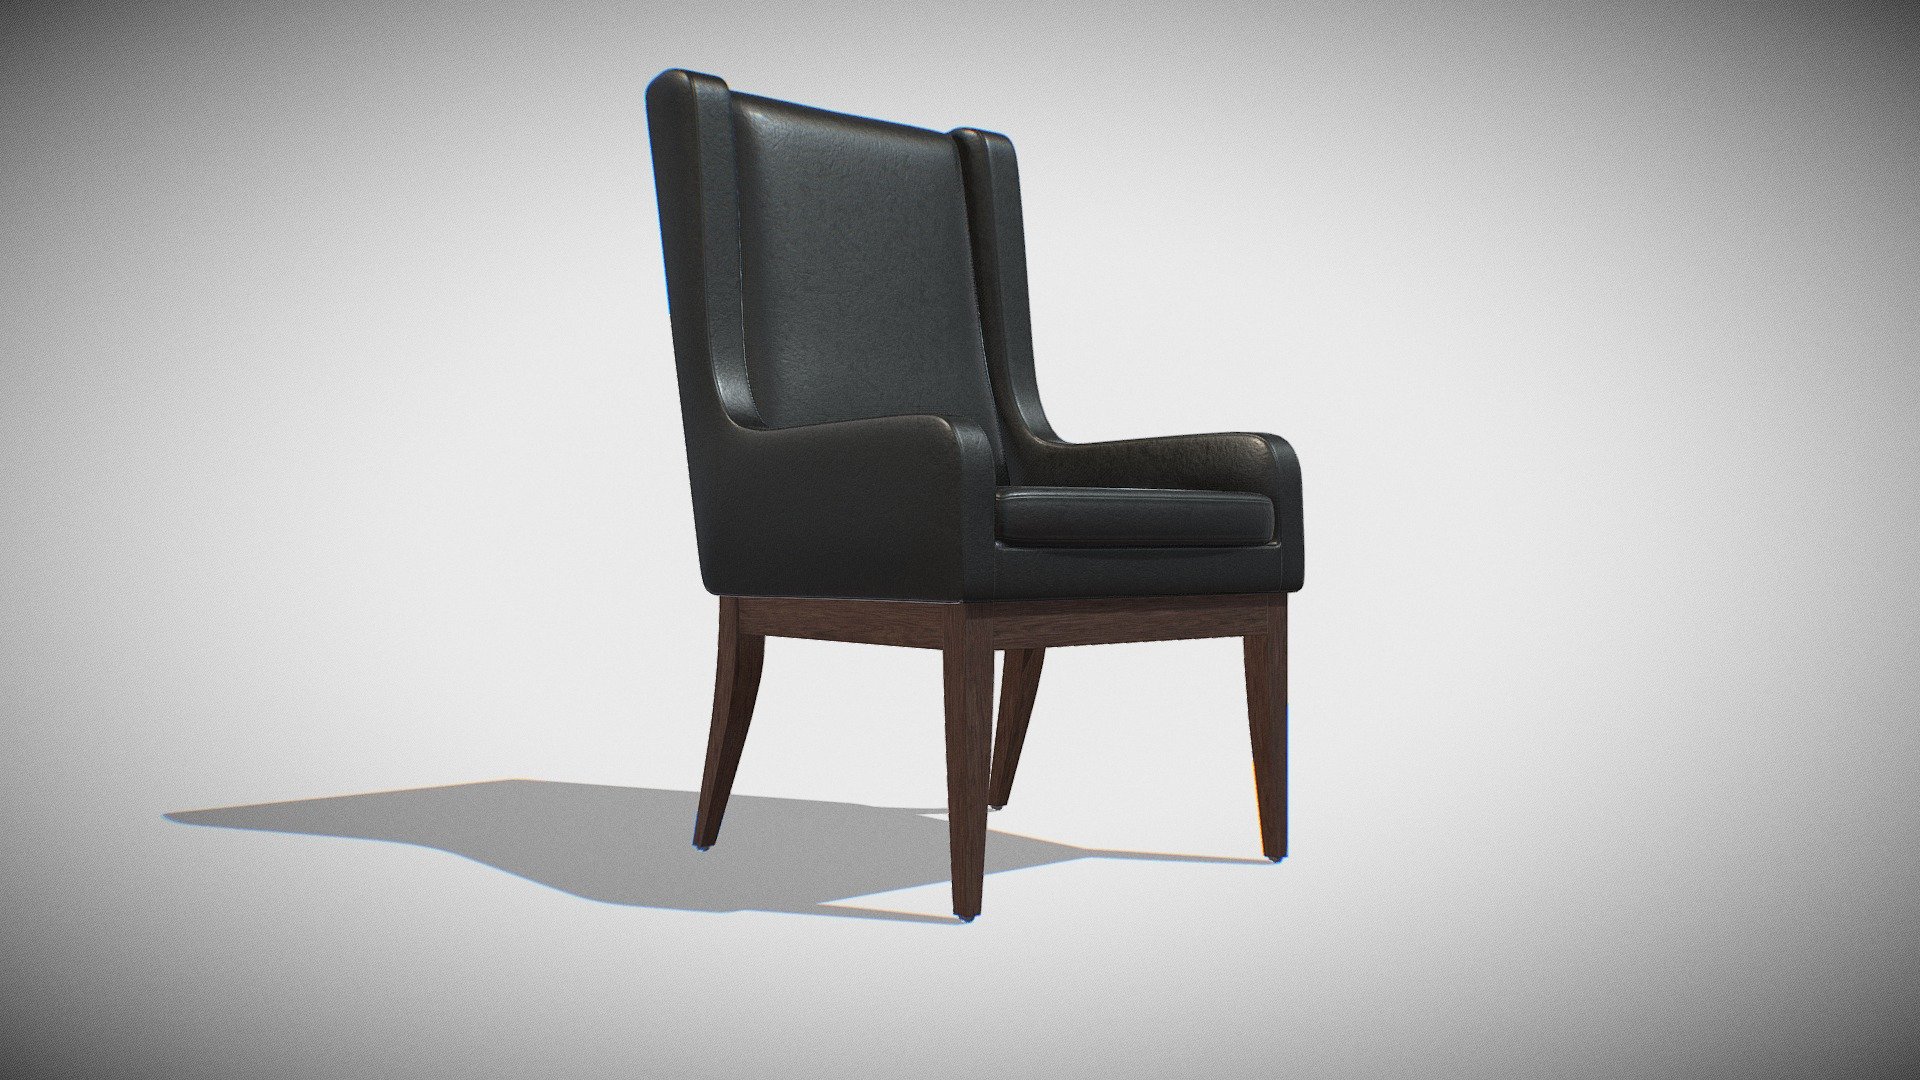 3d model of a chair for using in decoration in architecture interior. The model was created in latest version of Blender and textured in Substance Painter. It is in real proportions.

4096 x 4096 resolution of textures.

Metalnessworkflow- BaseColor, Normal, Metalness,Height, Ambient Occlusion and Roughness Textures - PNG 3d model